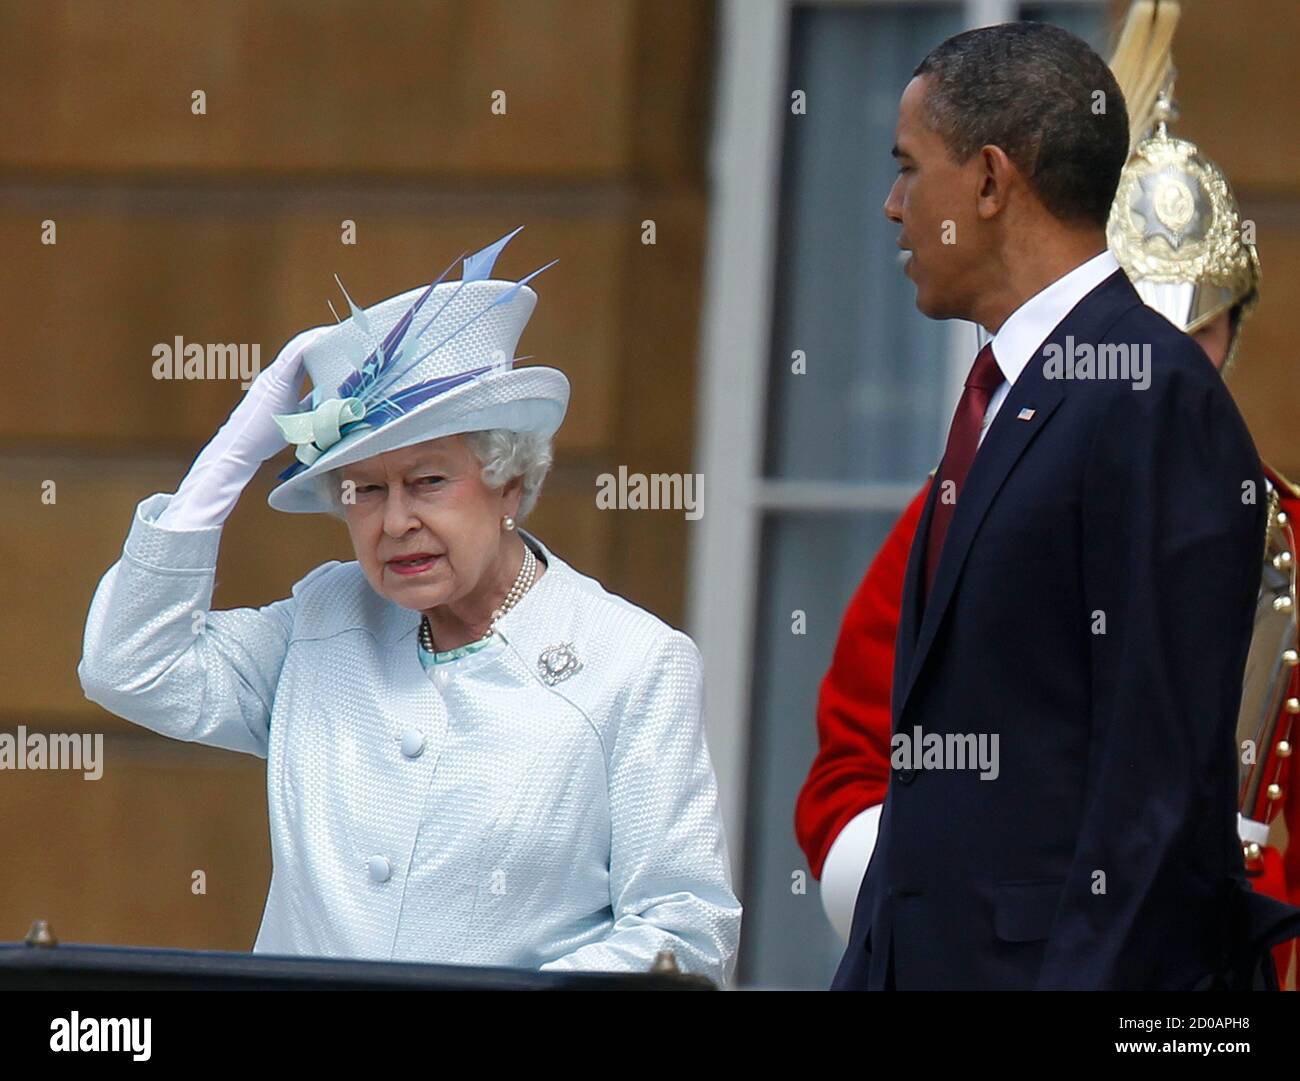 U.S. President Barack Obama looks on as Britain's Queen Elizabeth II holds on her hat as the wind blows during an official arrival ceremony on the Buckingham Palace Terrace stairs in London May 24, 2011.         REUTERS/Larry Downing      (BRITAIN - Tags: POLITICS ROYALS) Stock Photo